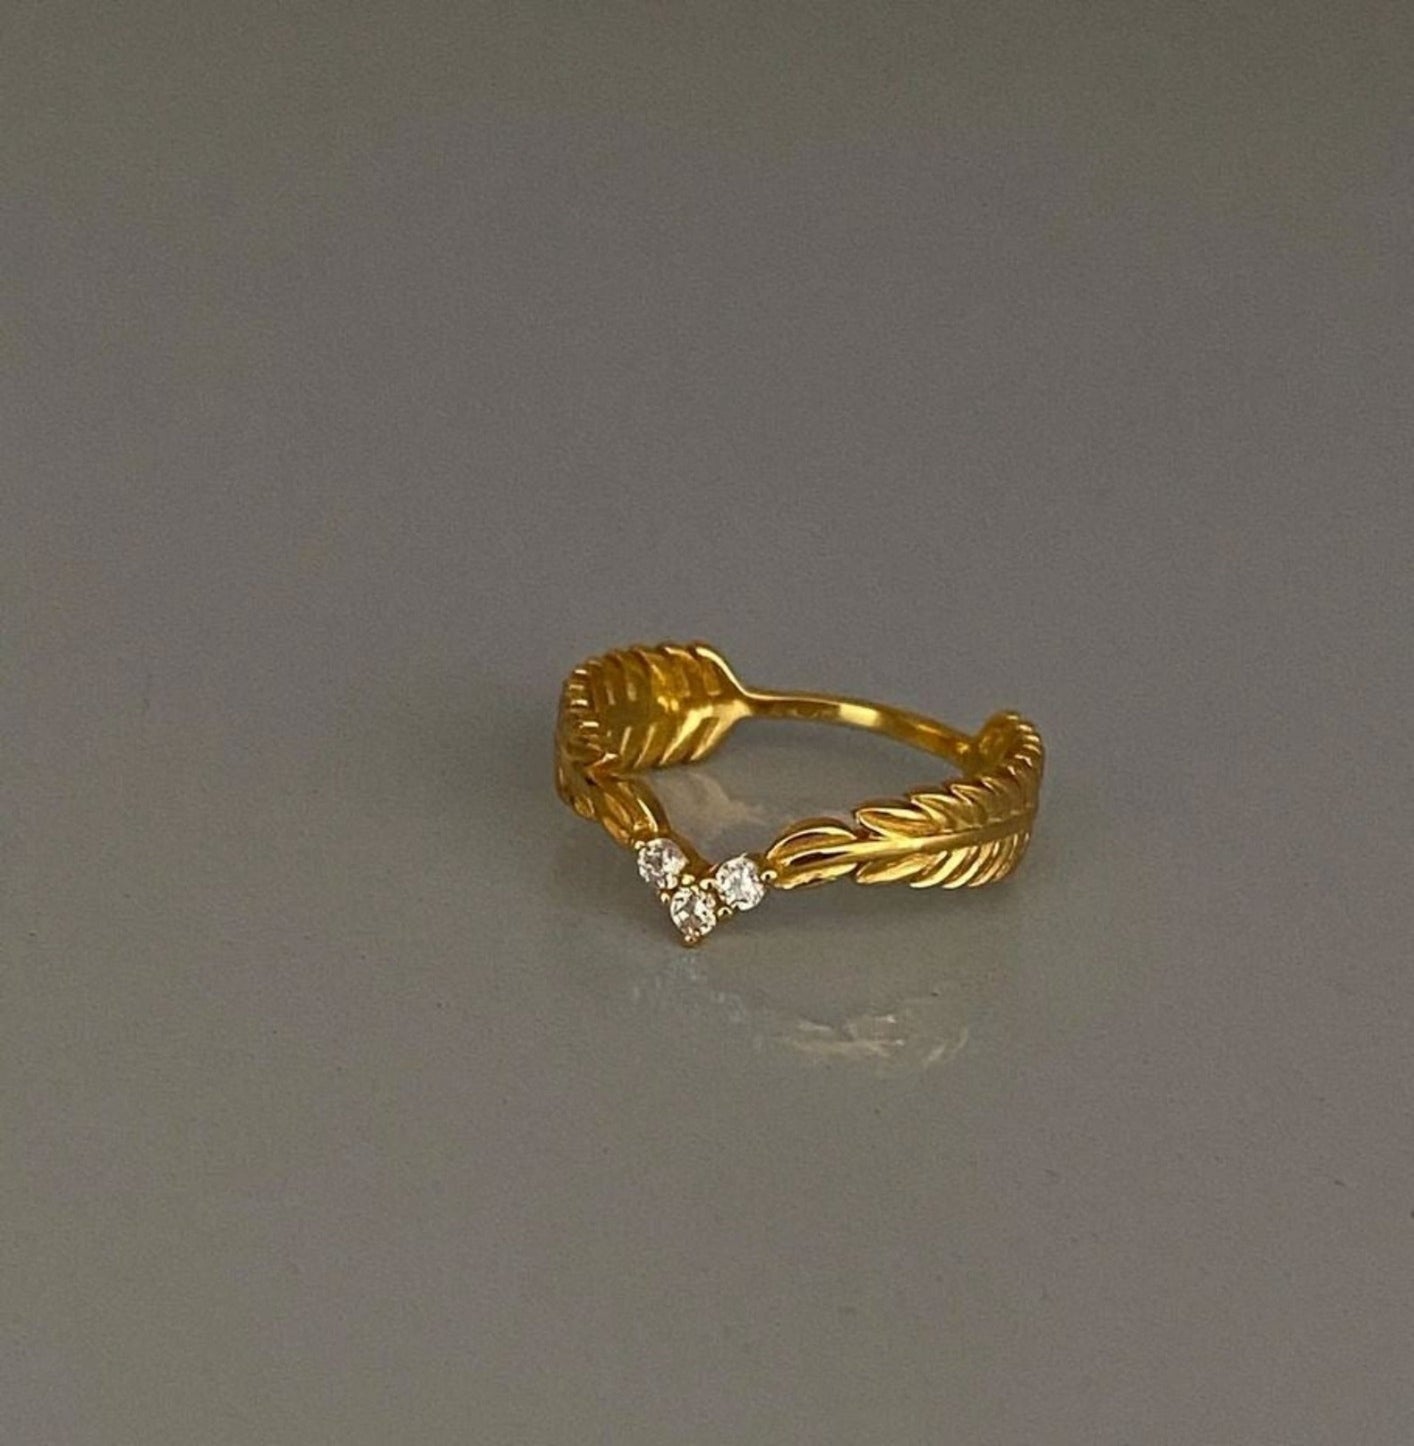 LEAF RING ring Yubama Jewelry Online Store - The Elegant Designs of Gold and Silver ! 